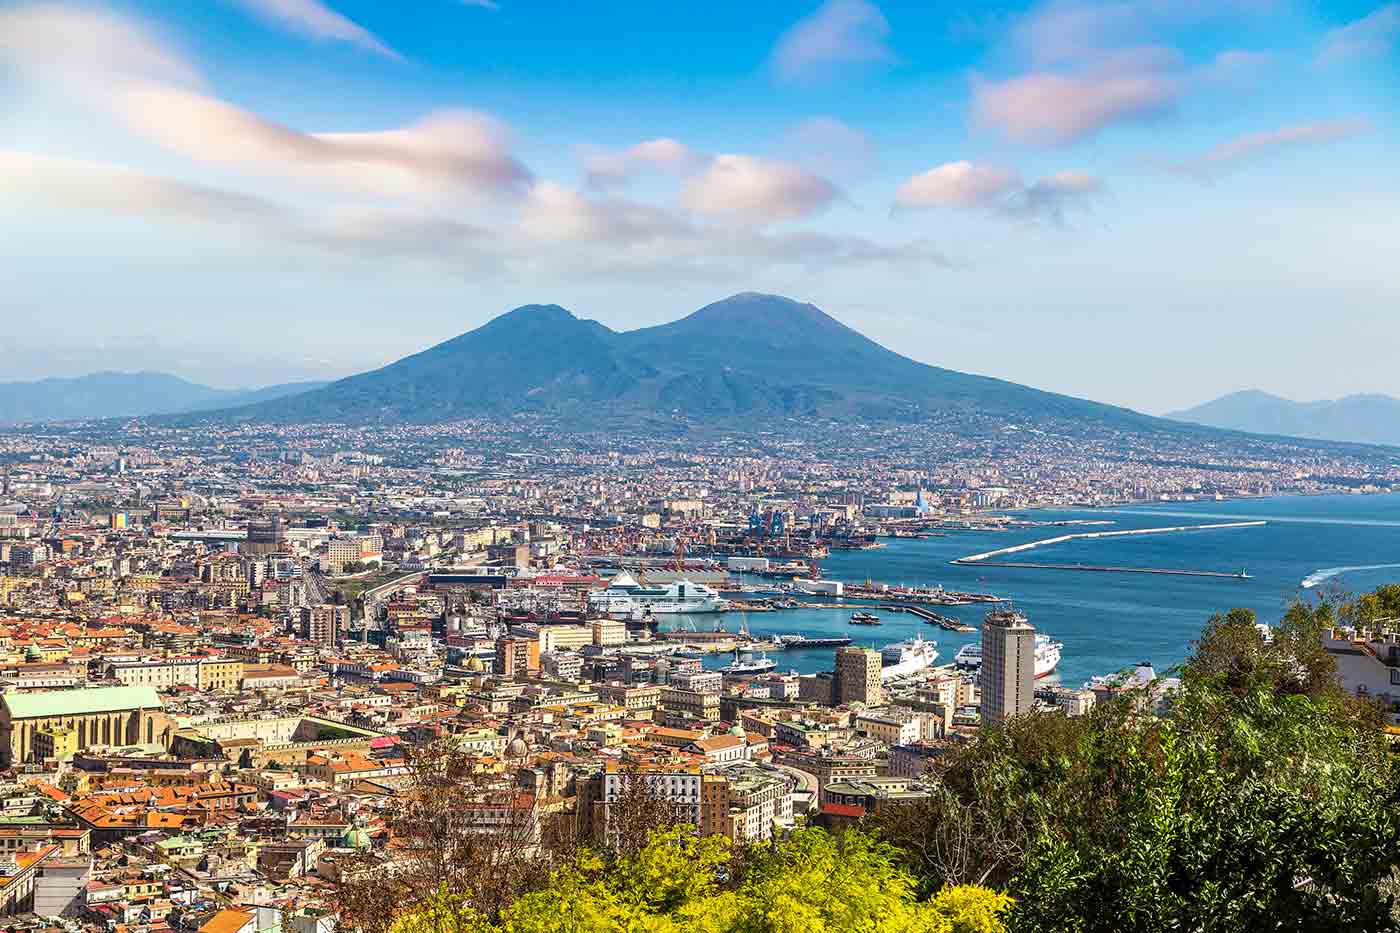 Tourist Attractions to Visit in Naples